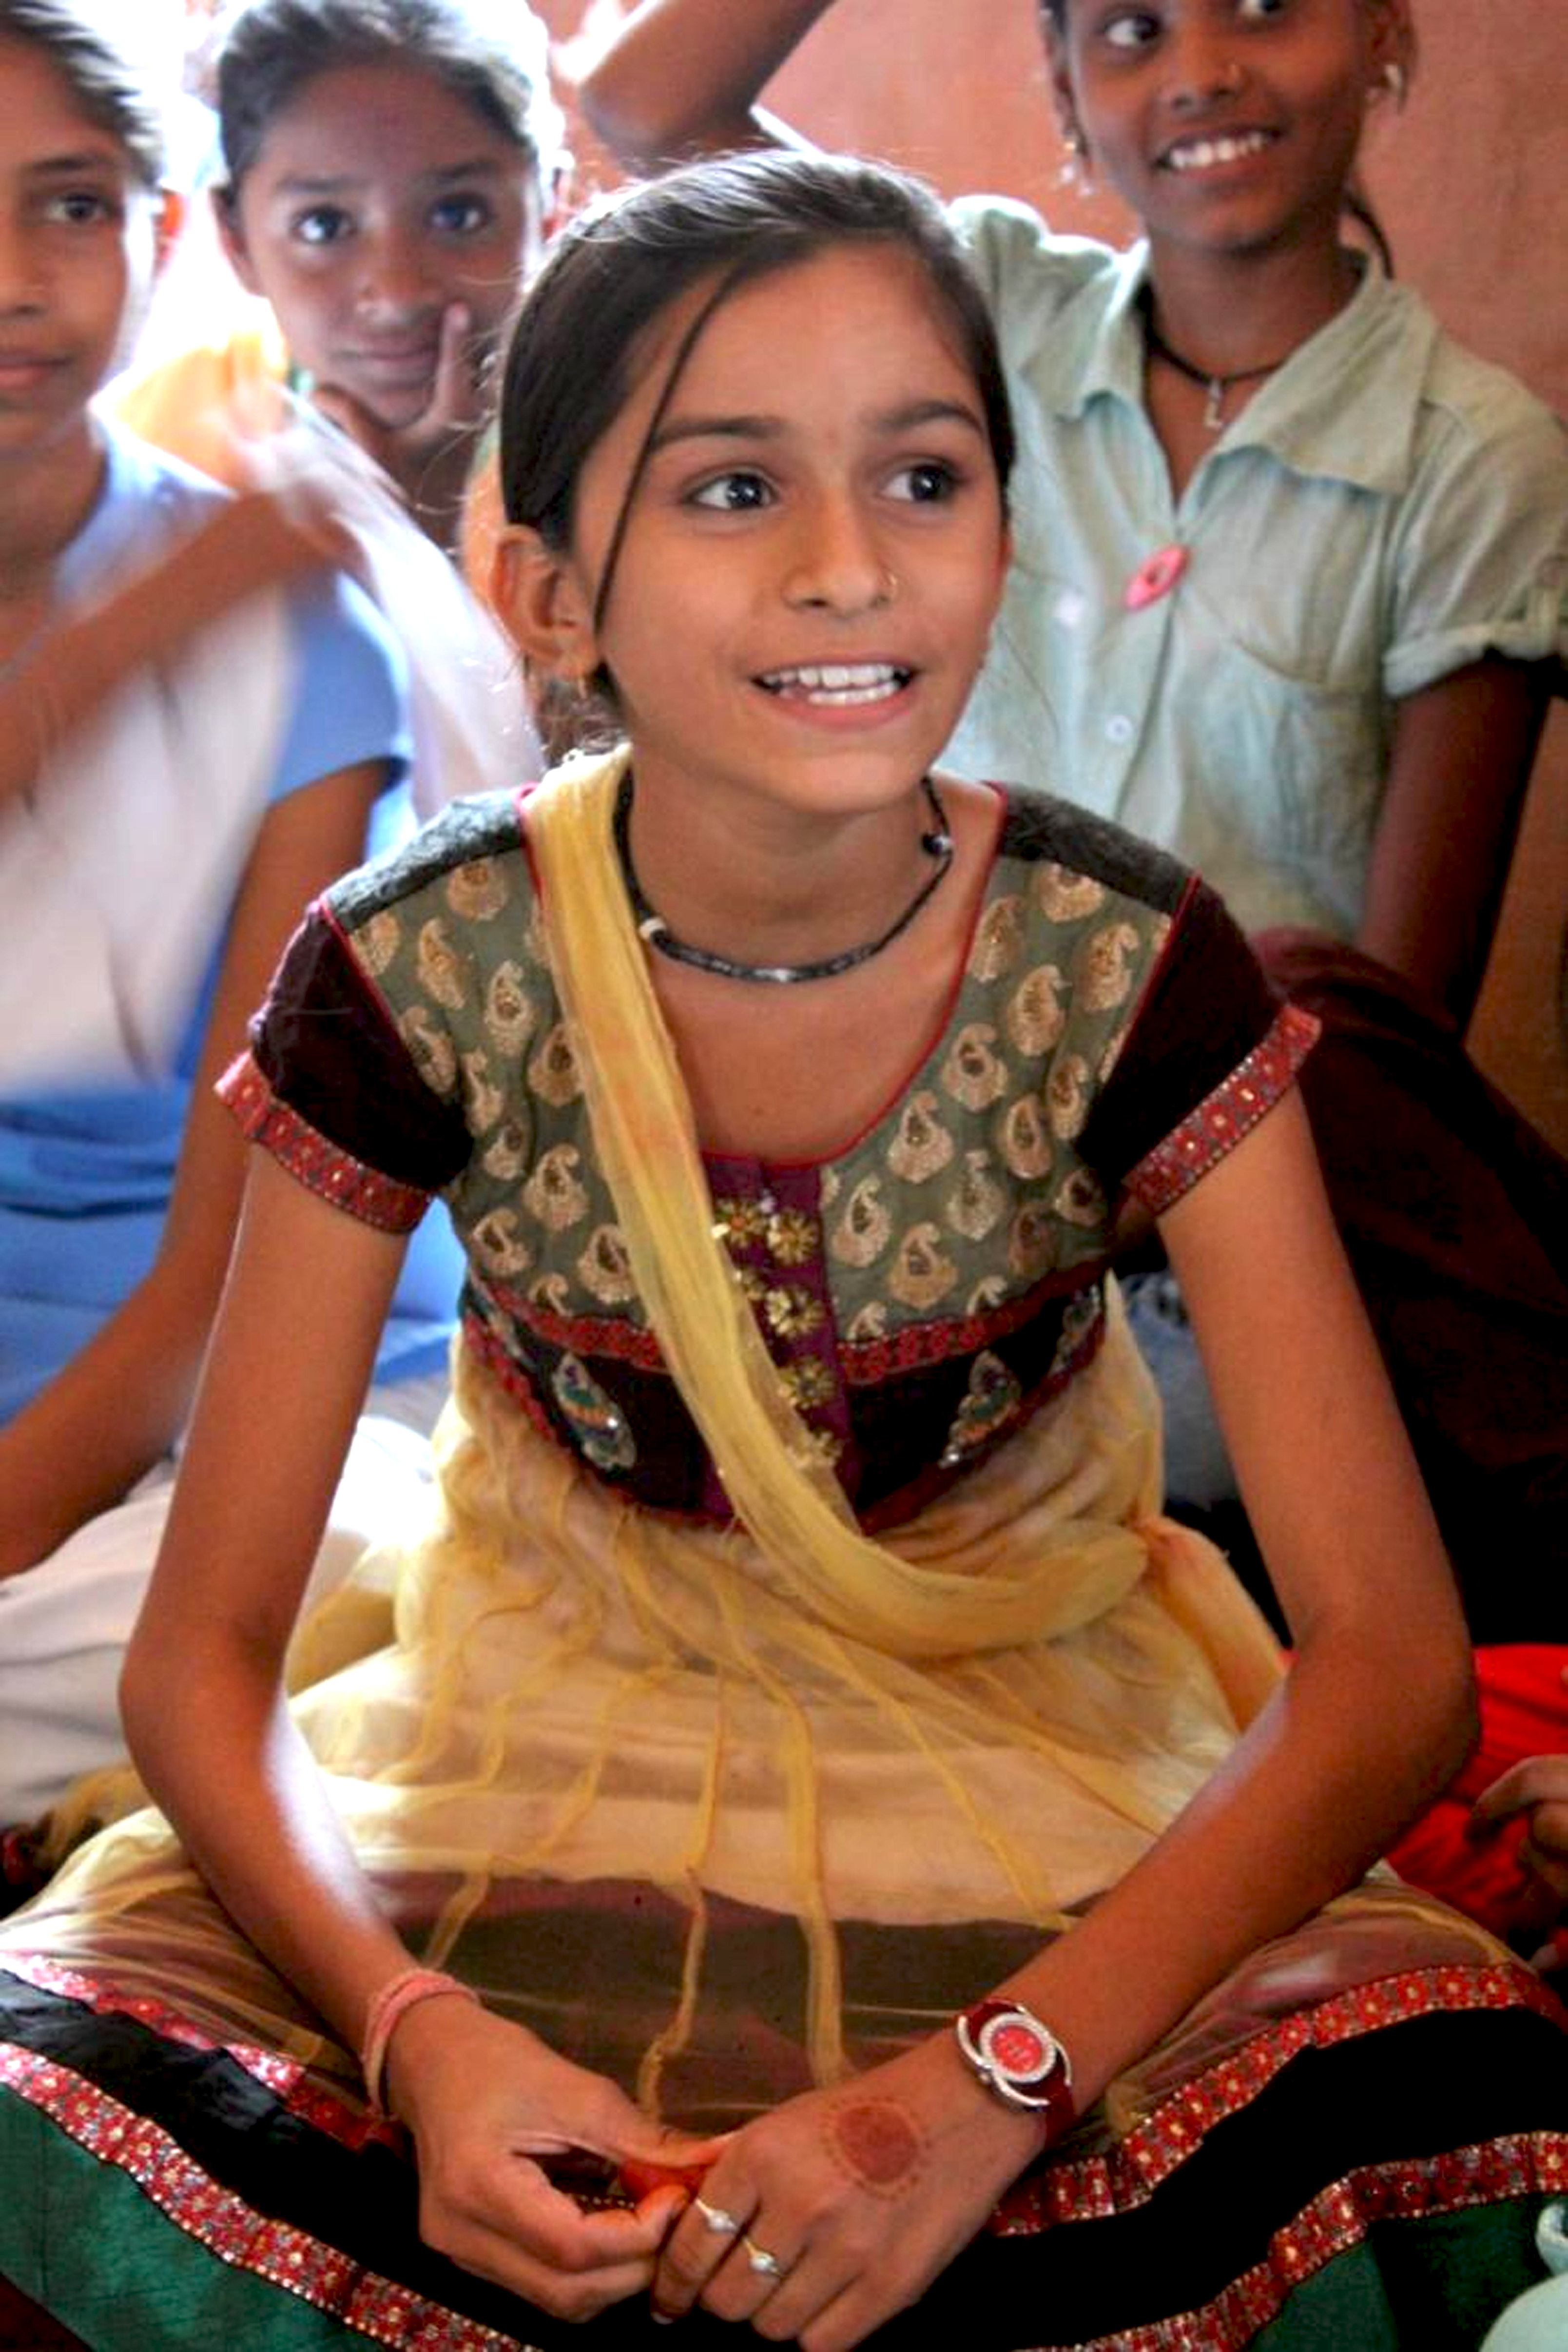 Anjali learning at school in Rajasthan.